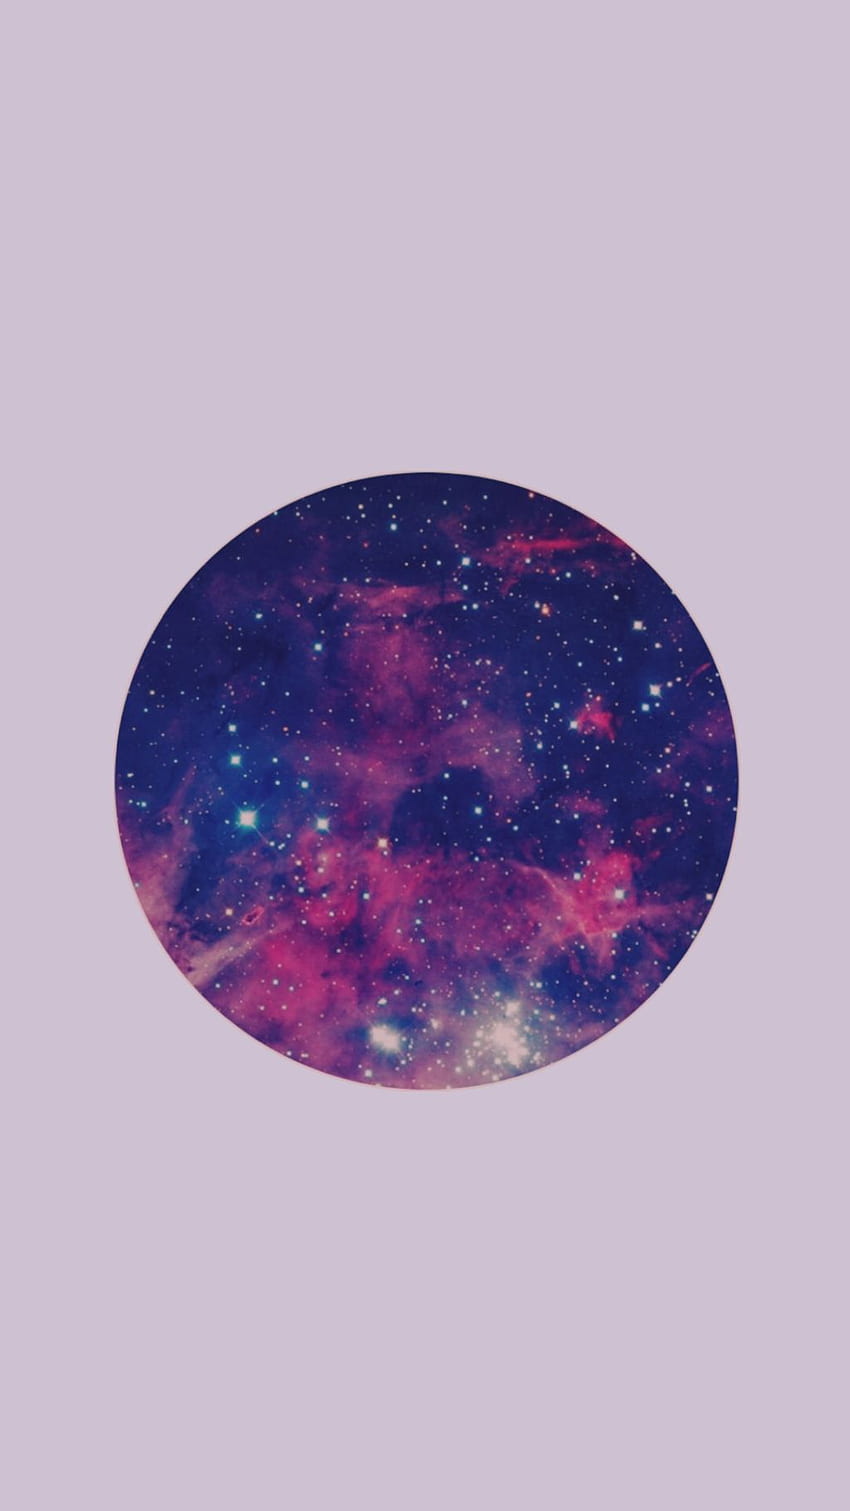 Iphone wallpaper galaxy, Space wallpaper, Wallpaper galaxy - Profile picture